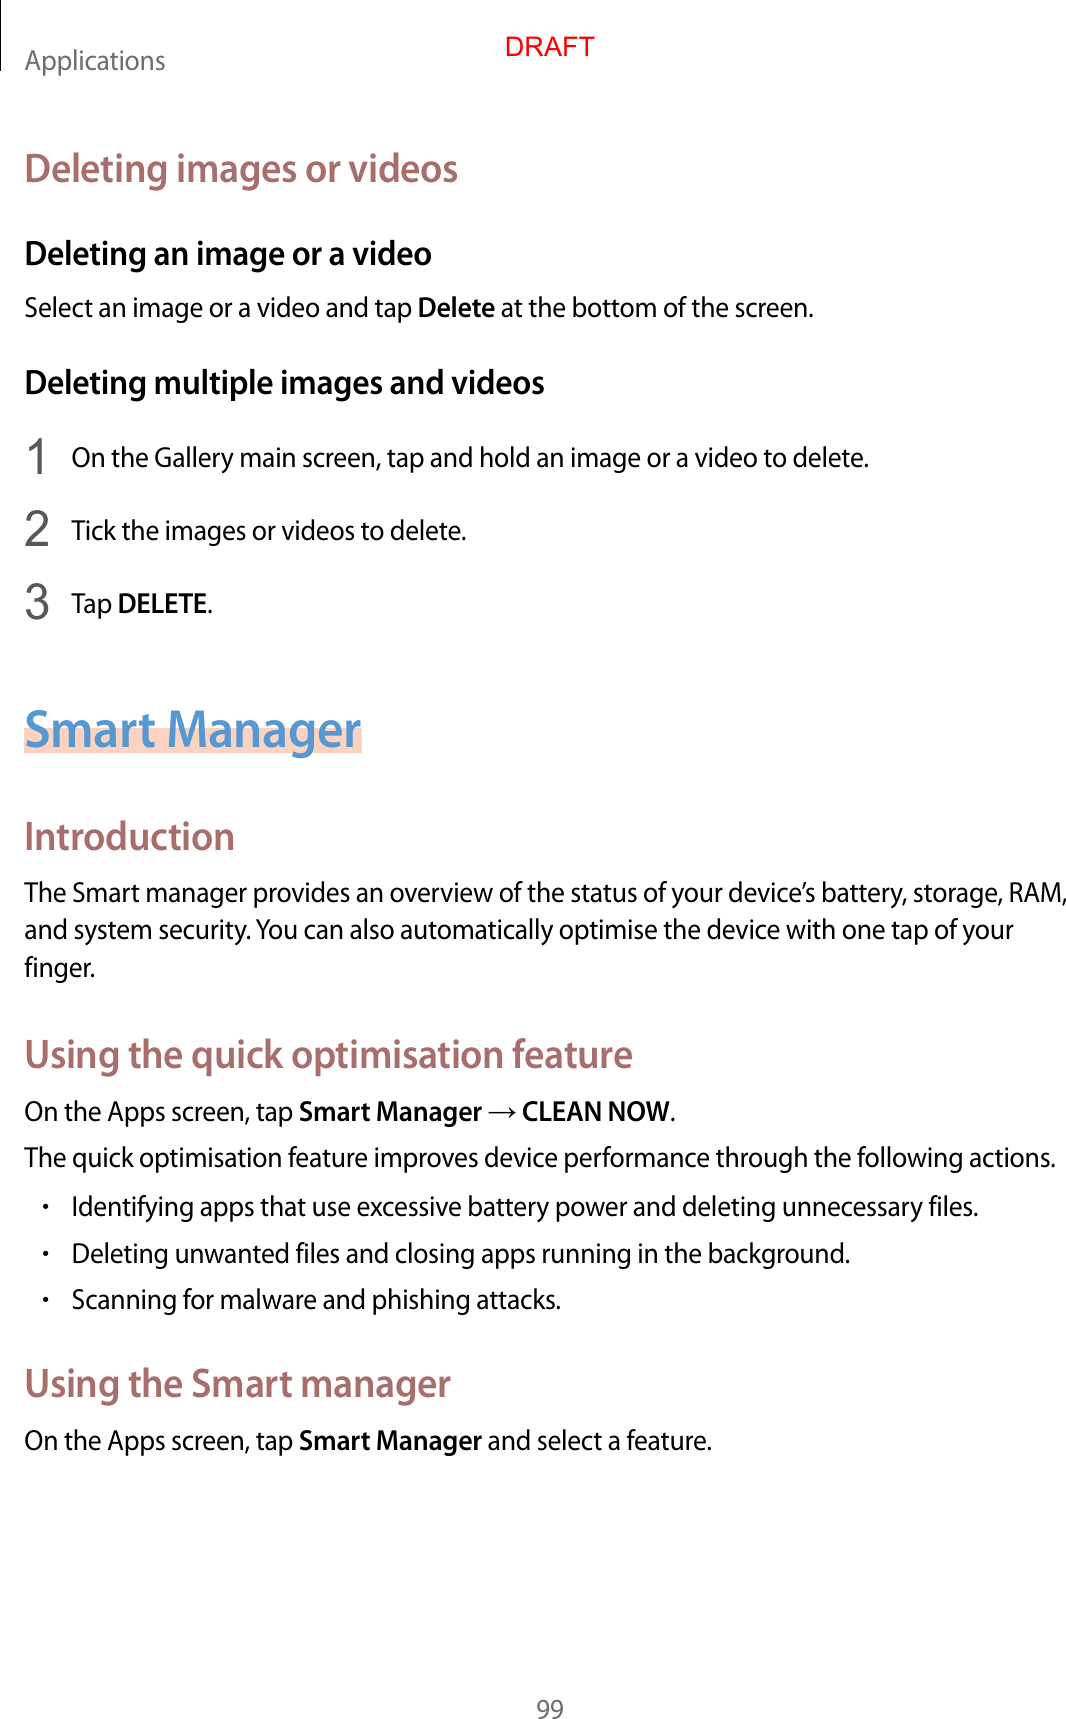 Applications99Deleting images or videosDeleting an image or a videoSelect an image or a video and tap Delete at the bottom of the screen.Deleting multiple images and videos1  On the Gallery main screen, tap and hold an image or a video to delete.2  Tick the images or videos to delete.3  Tap DELETE.Smart ManagerIntroductionThe Smart manager provides an overview of the status of your device’s battery, storage, RAM, and system security. You can also automatically optimise the device with one tap of your finger.Using the quick optimisation featureOn the Apps screen, tap Smart Manager  CLEAN NOW.The quick optimisation feature improves device performance through the following actions.•Identifying apps that use excessive battery power and deleting unnecessary files.•Deleting unwanted files and closing apps running in the background.•Scanning for malware and phishing attacks.Using the Smart managerOn the Apps screen, tap Smart Manager and select a feature.DRAFT